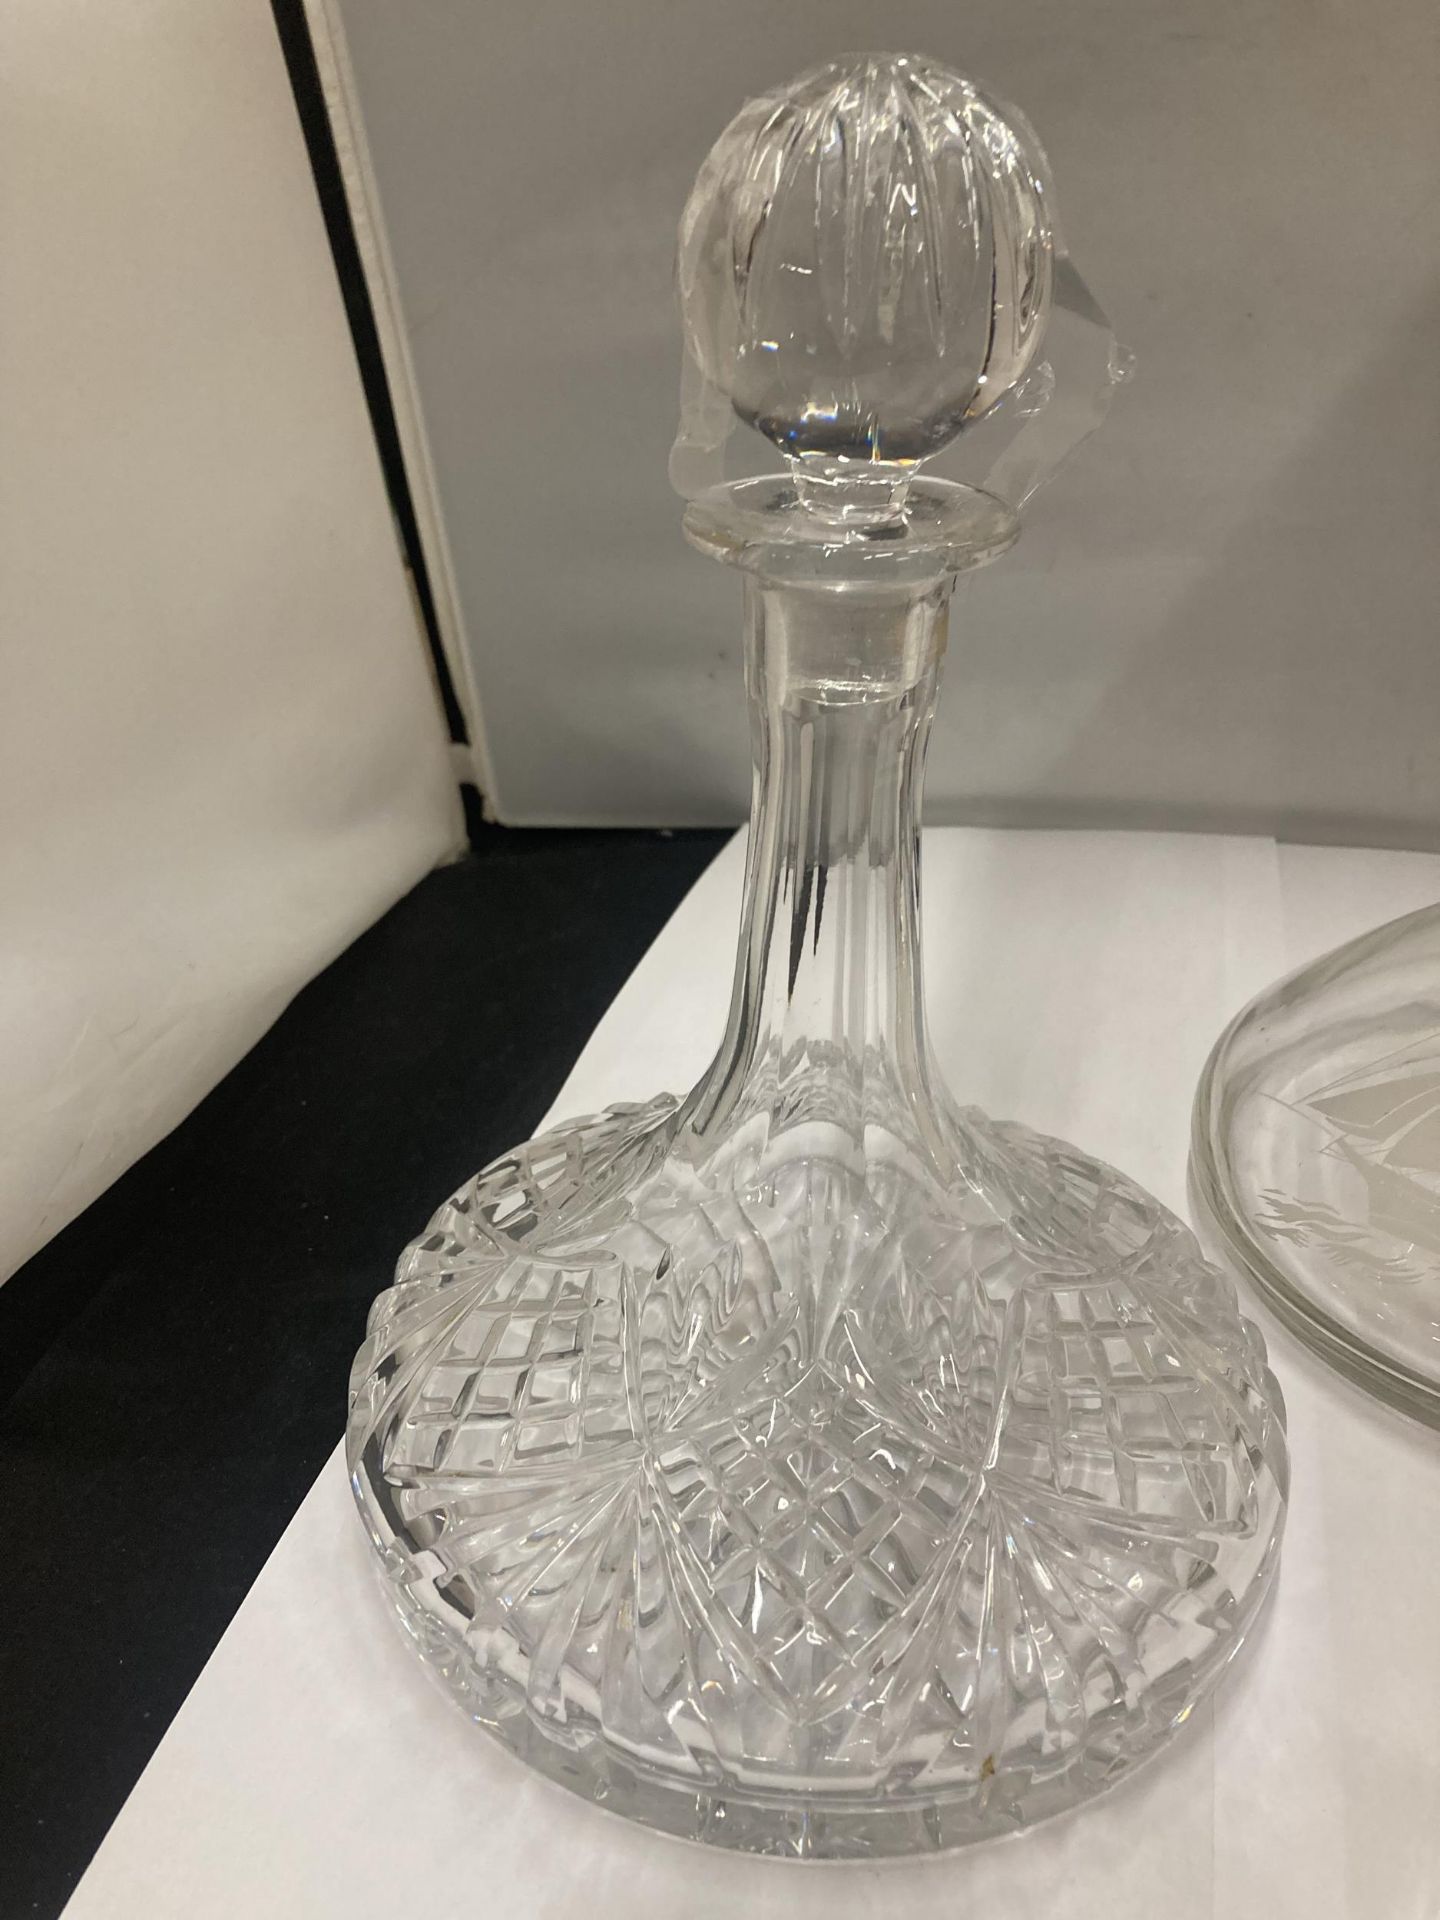 THREE GLASS DECANTERS TO INCLUDE TWO SHIPS DECANTERS - Image 2 of 3